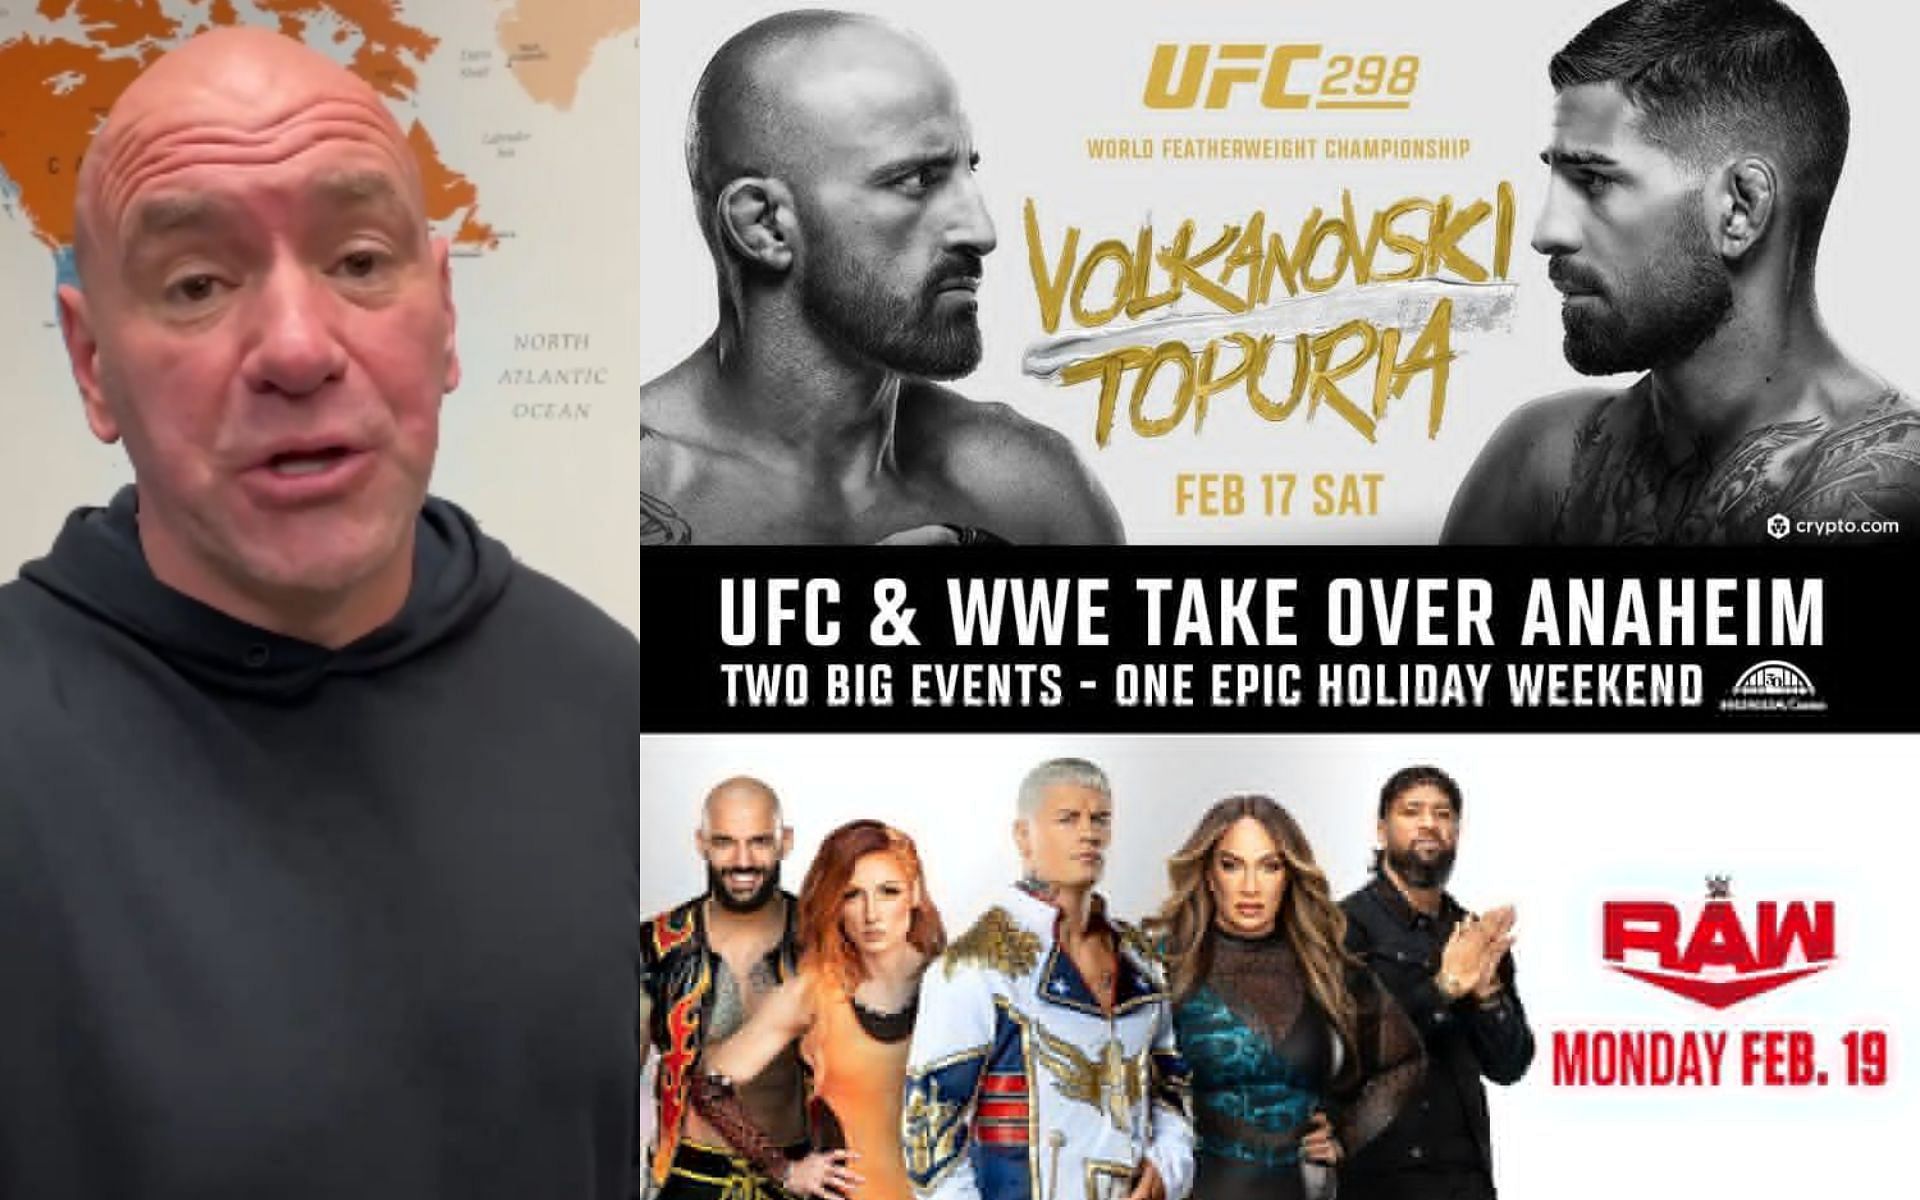 UFC [Dana White, Left] announces tickets on sale for special TKO weekend with WWE [Poster, Right] [Image credit: @danawhite and @ufc - X]